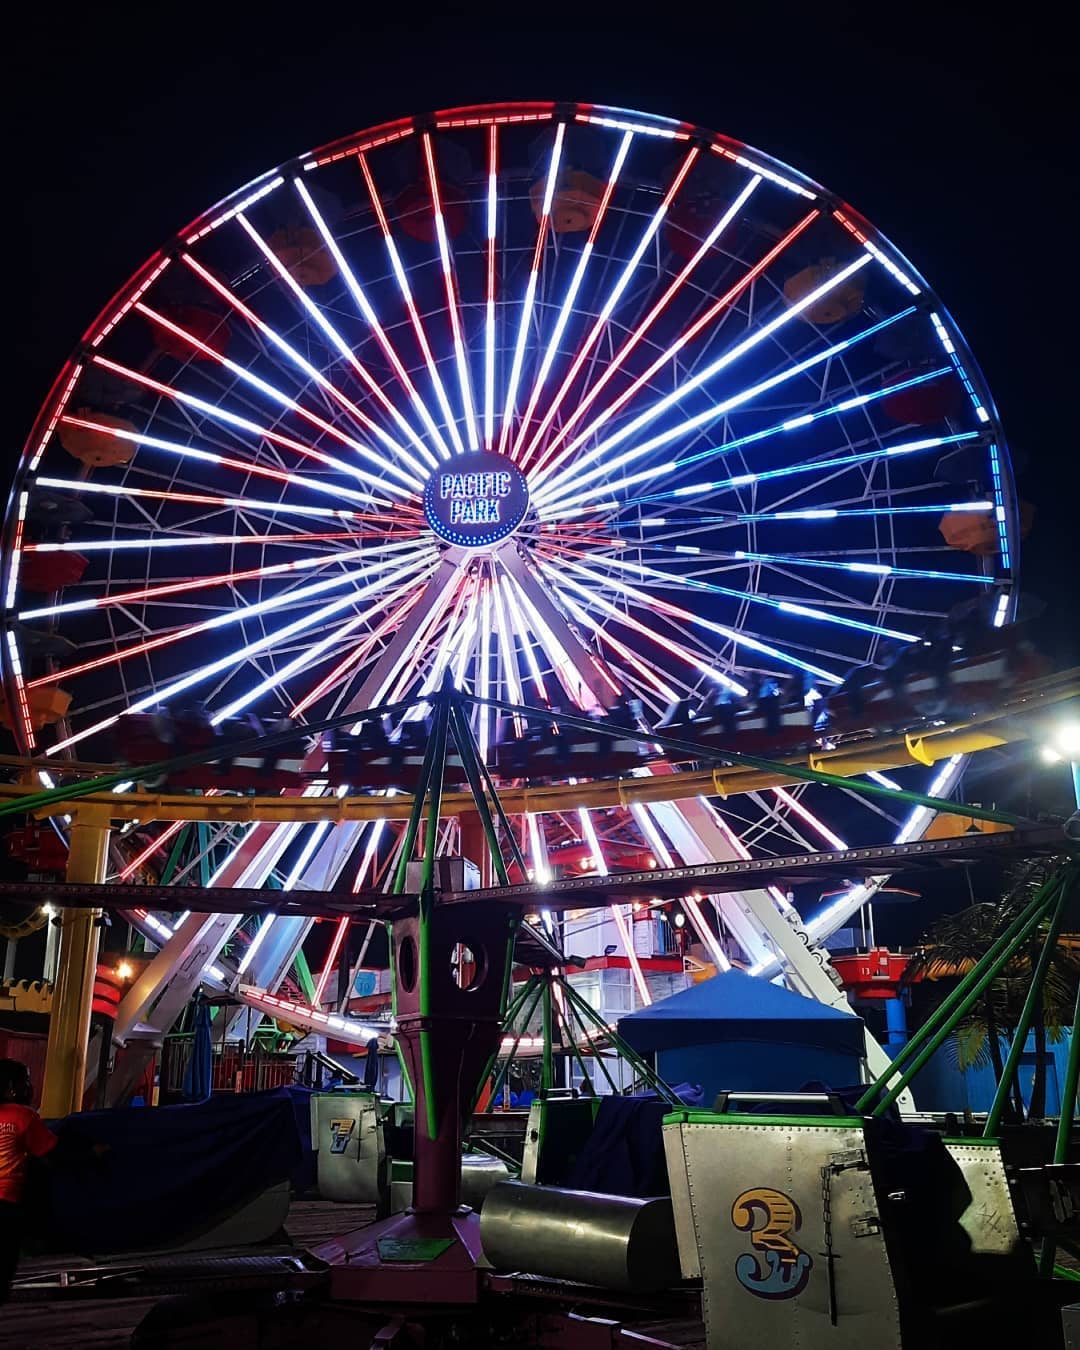 The Santa Monica Pier Ferris Wheel will be lit red, white, and blue from Friday, July 1 to Monday, July 4 in recognition of Independence Day.  Independence Day in the United States is celebrated annually on July the 4th and commemorates the signing of the Declaration of Independence in 1776. The Continental Congress declared that the thirteen American colonies were no longer subject to the monarchy of Britain and were united, free, and independent states.  In anticipation that the 4th of July weekend will be incredibly busy on the Santa Monica Pier, parking can be tricky as many folks head to the beach after work and streets around the Pier can become congested. We strongly recommend taking the Metro: the Expo line drops you off at 4th and Ocean – a quick 10-minute walk from the Pier deck.  📷: @kissvana
.
.
.
#pacificpark #pacpark #santamonicapier #santamonica #4thofjuly #independenceday # #wheellighting #pacificwheel #wheellighting #pacificwheel @abc7la @discoverla @cbsla @ktla5news @foxla @seesantamonica @smdailypress @lamag @laweekly